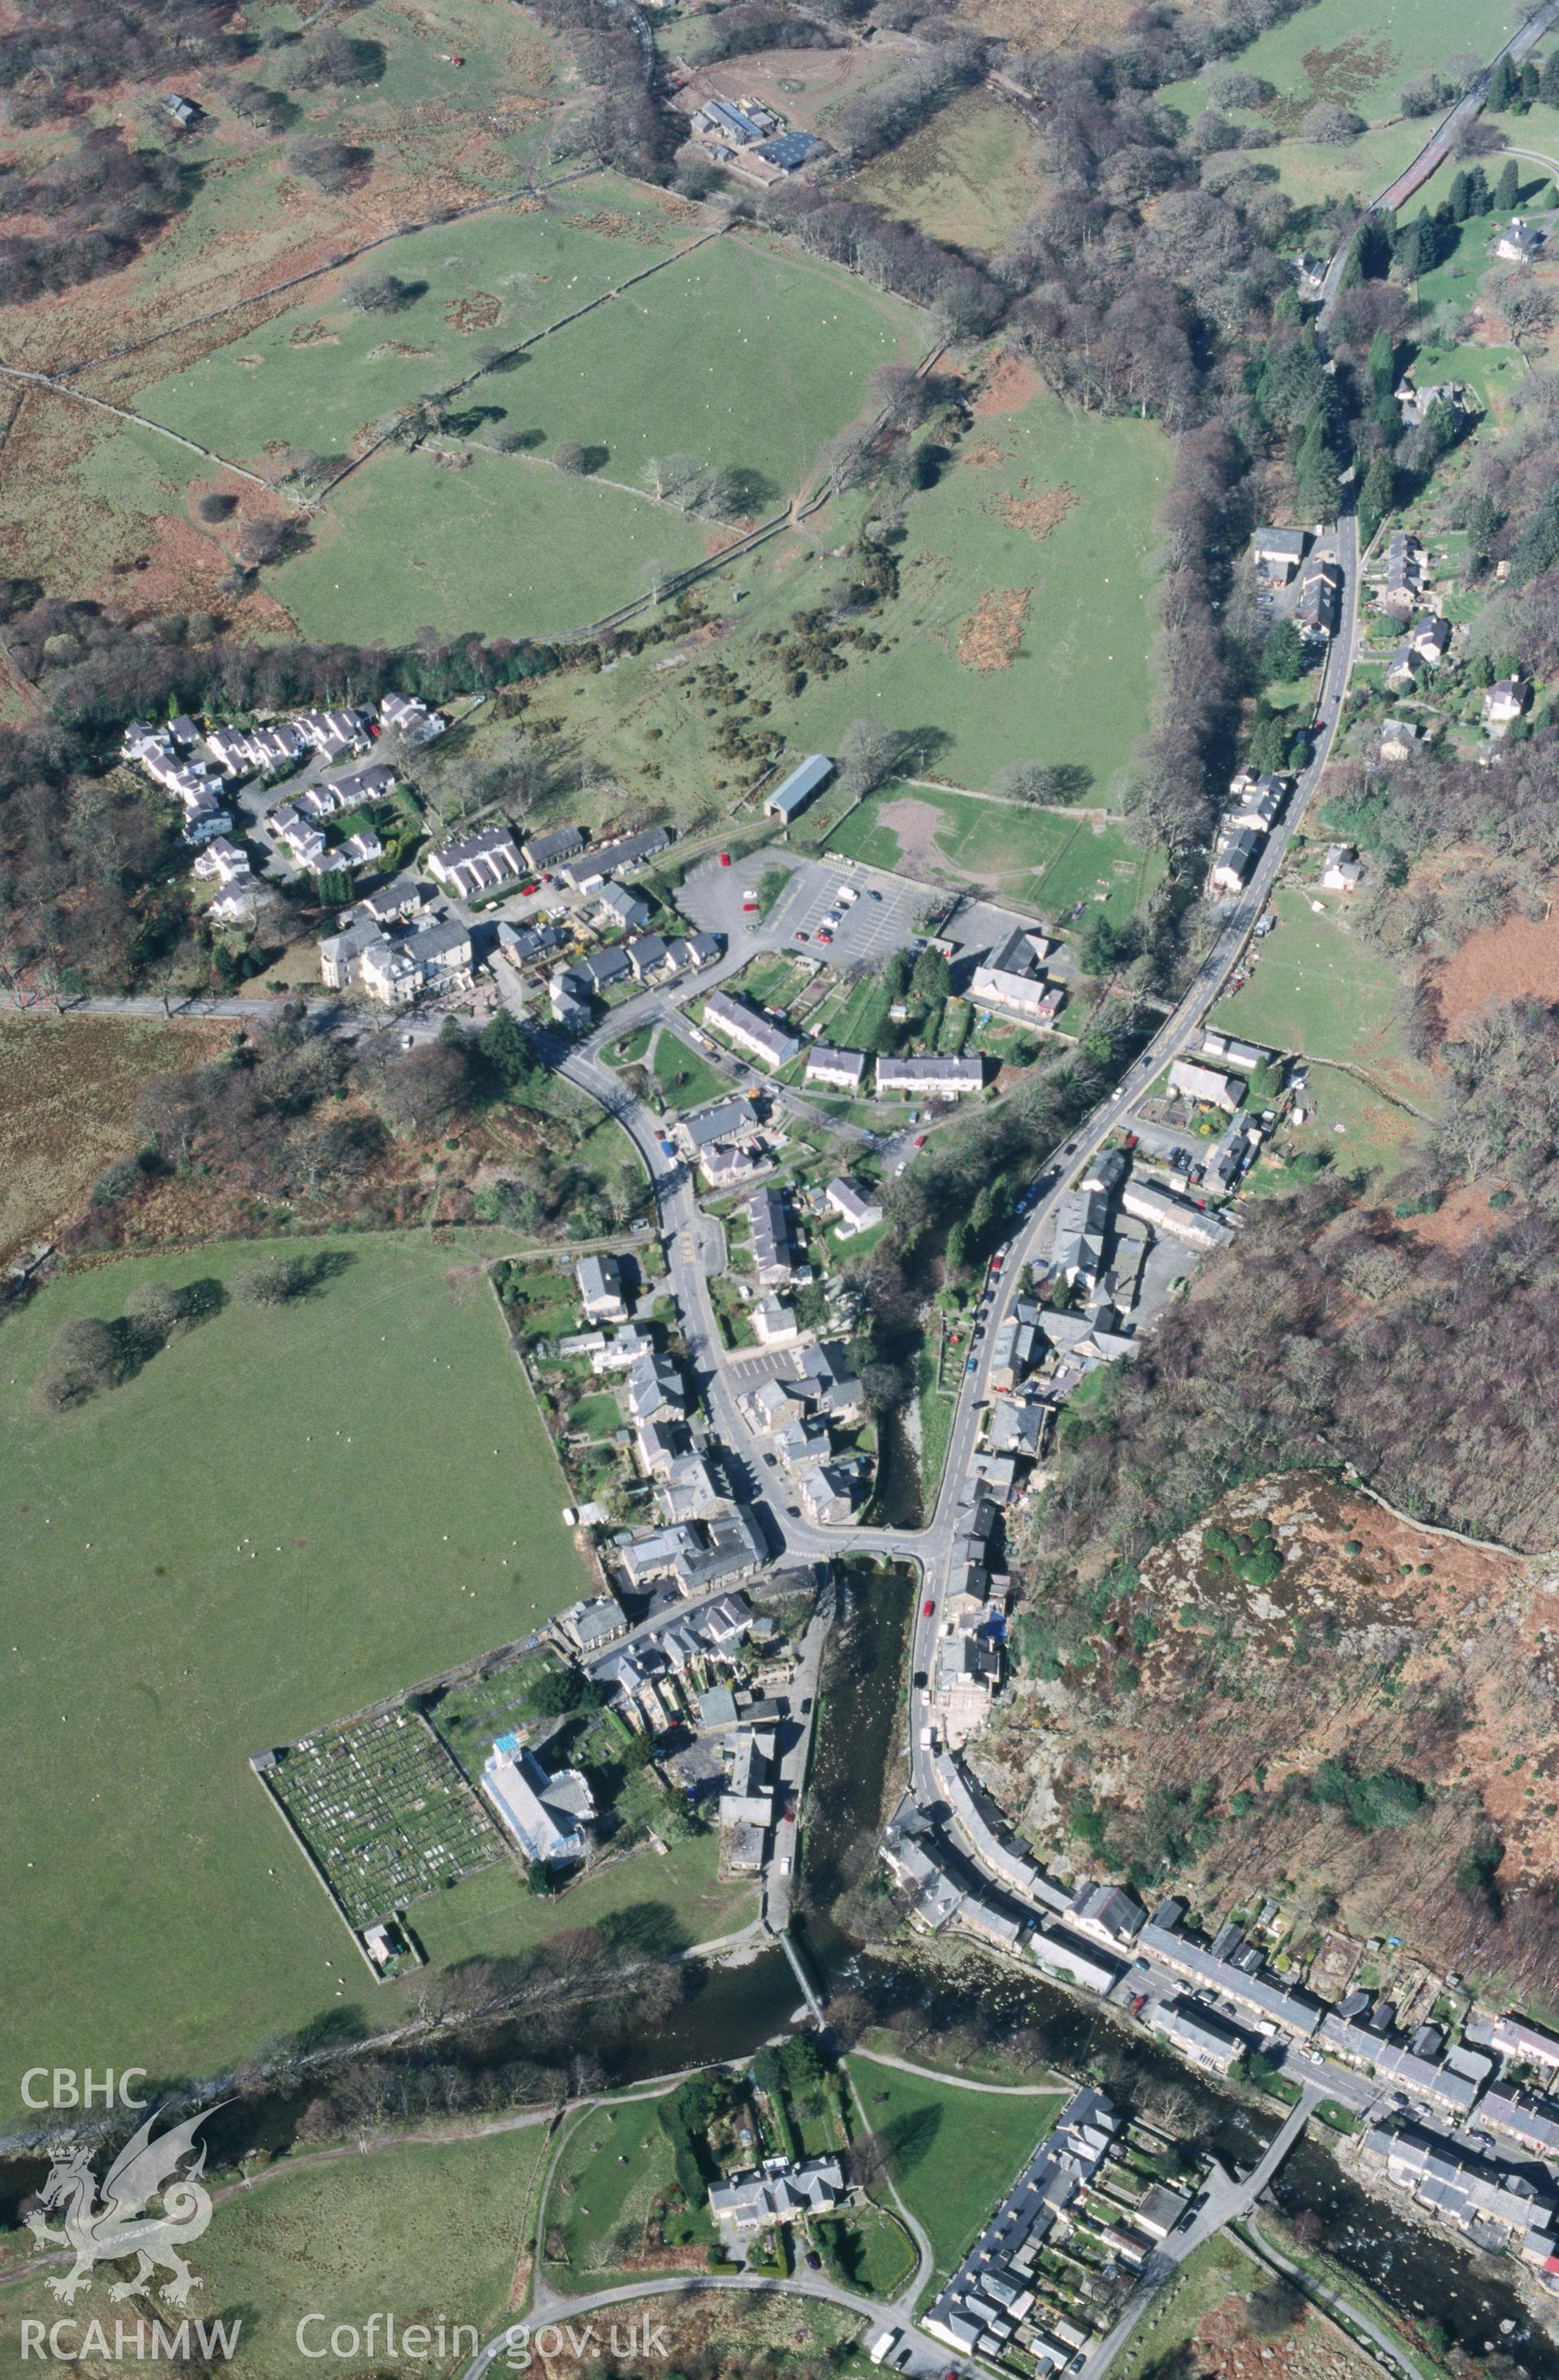 Slide of RCAHMW colour oblique aerial photograph of Beddgelert, taken by T.G. Driver, 30/3/2000.